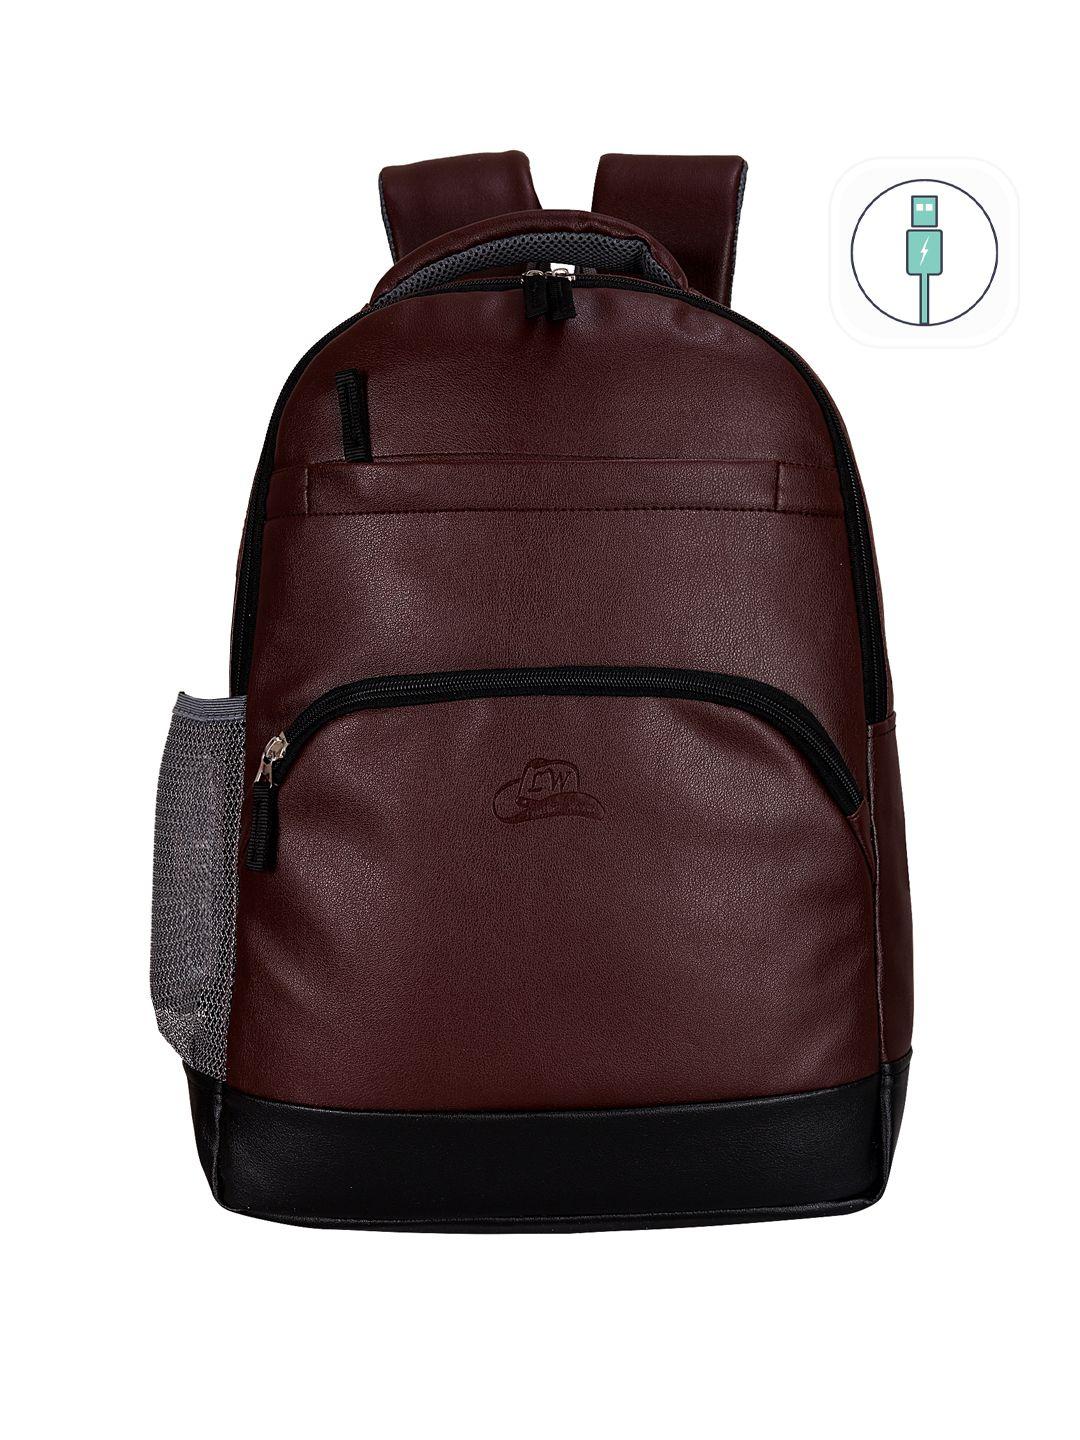 leather world unisex brown solid backpack